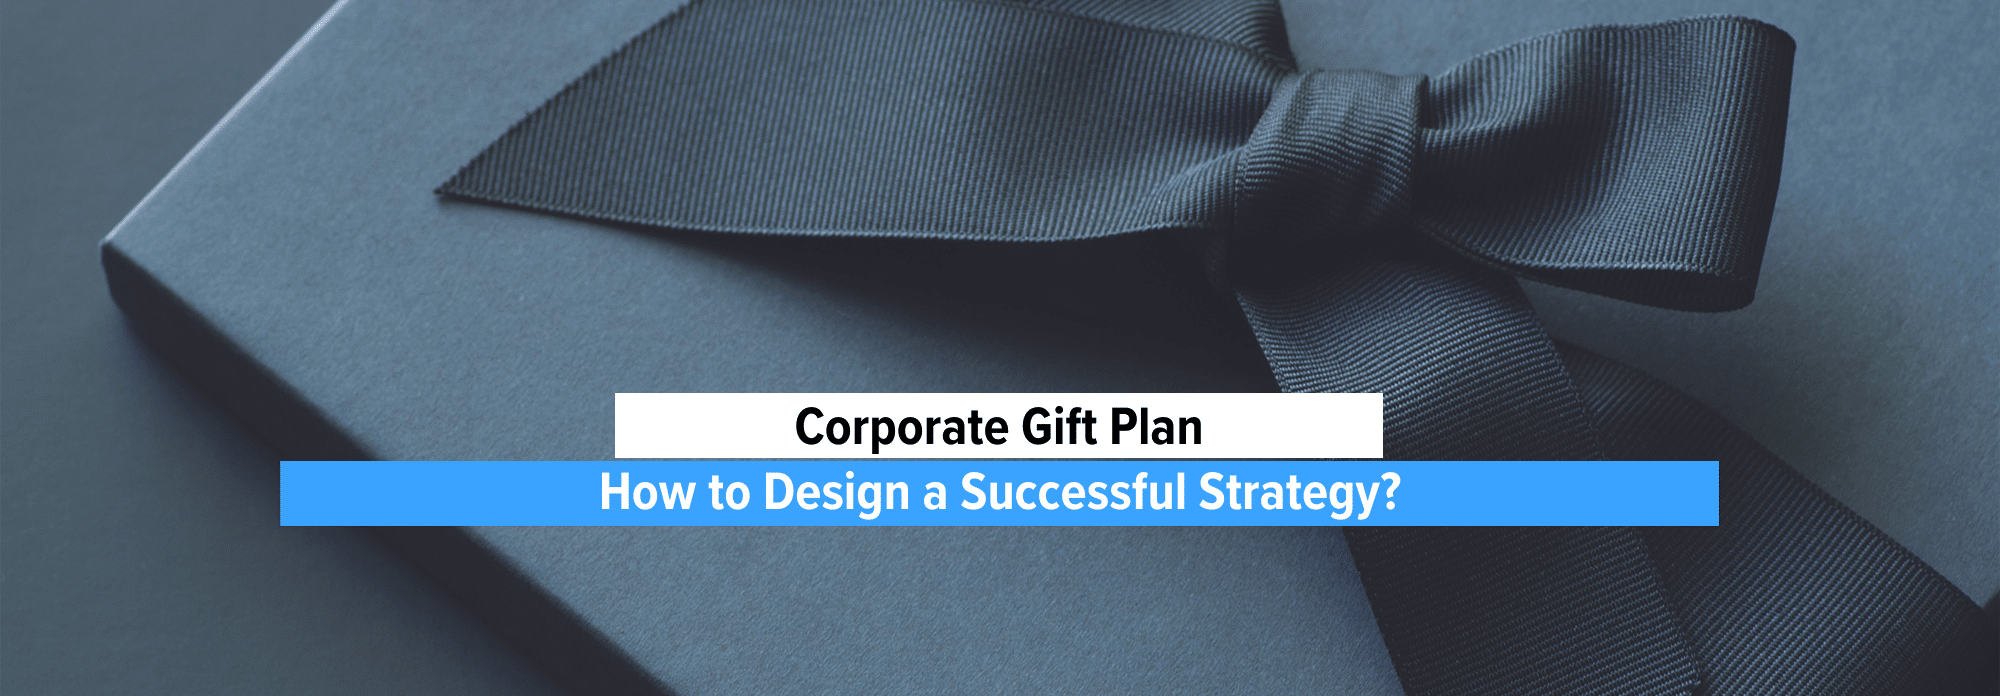 Corporate Gift Plan